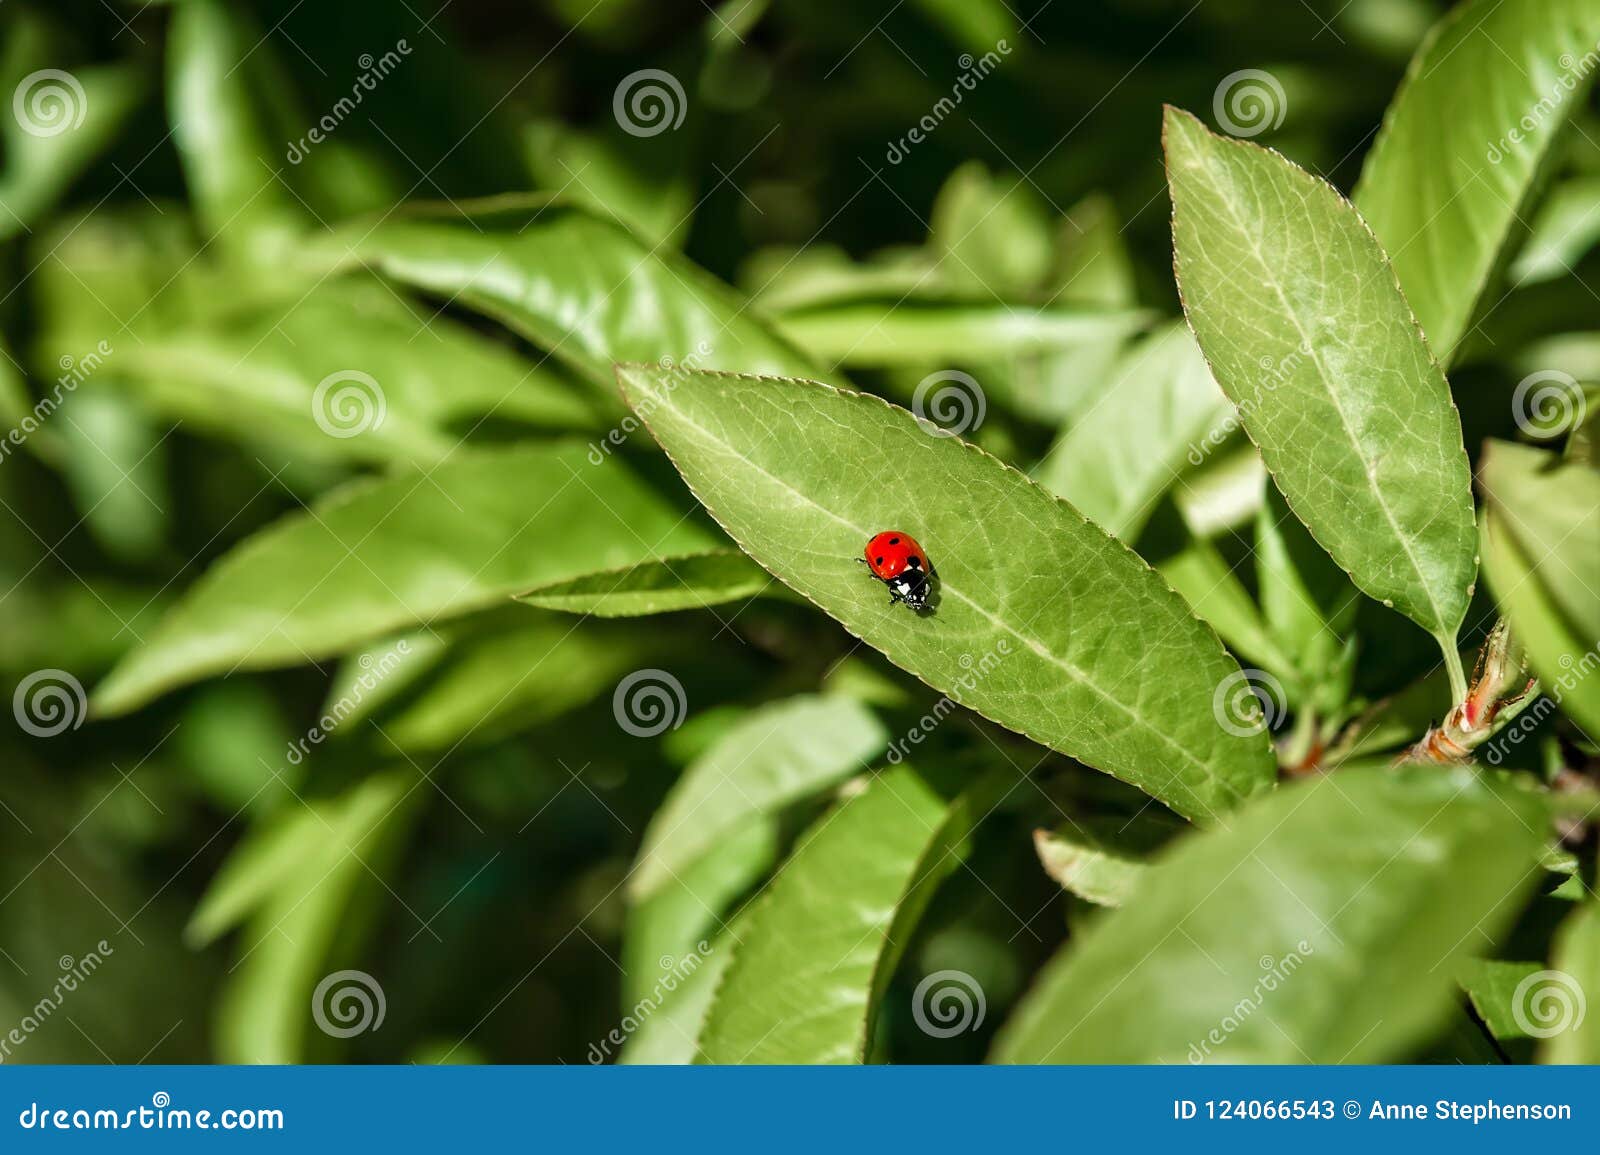 a lady bug crawls along a fruit tree leaf searching for food.